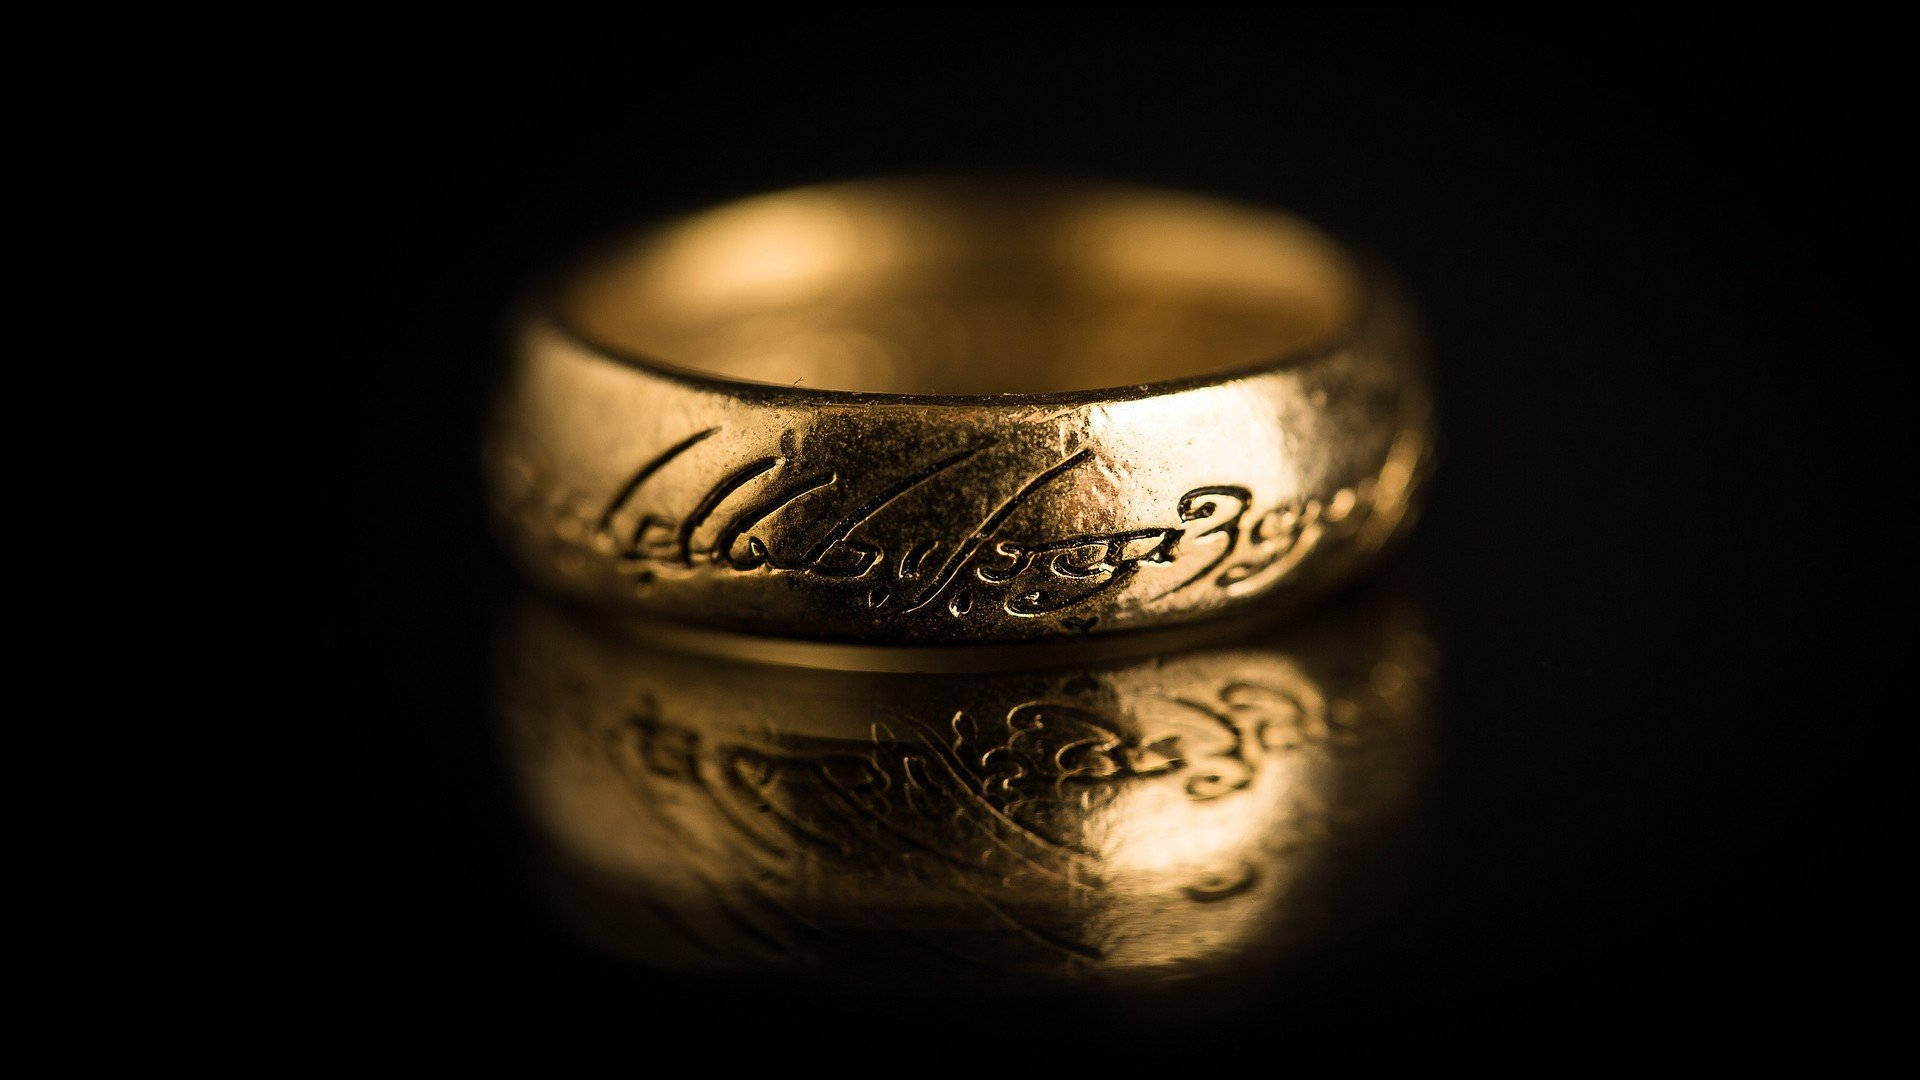 Jewelry Ring With Engraved Symbols Background